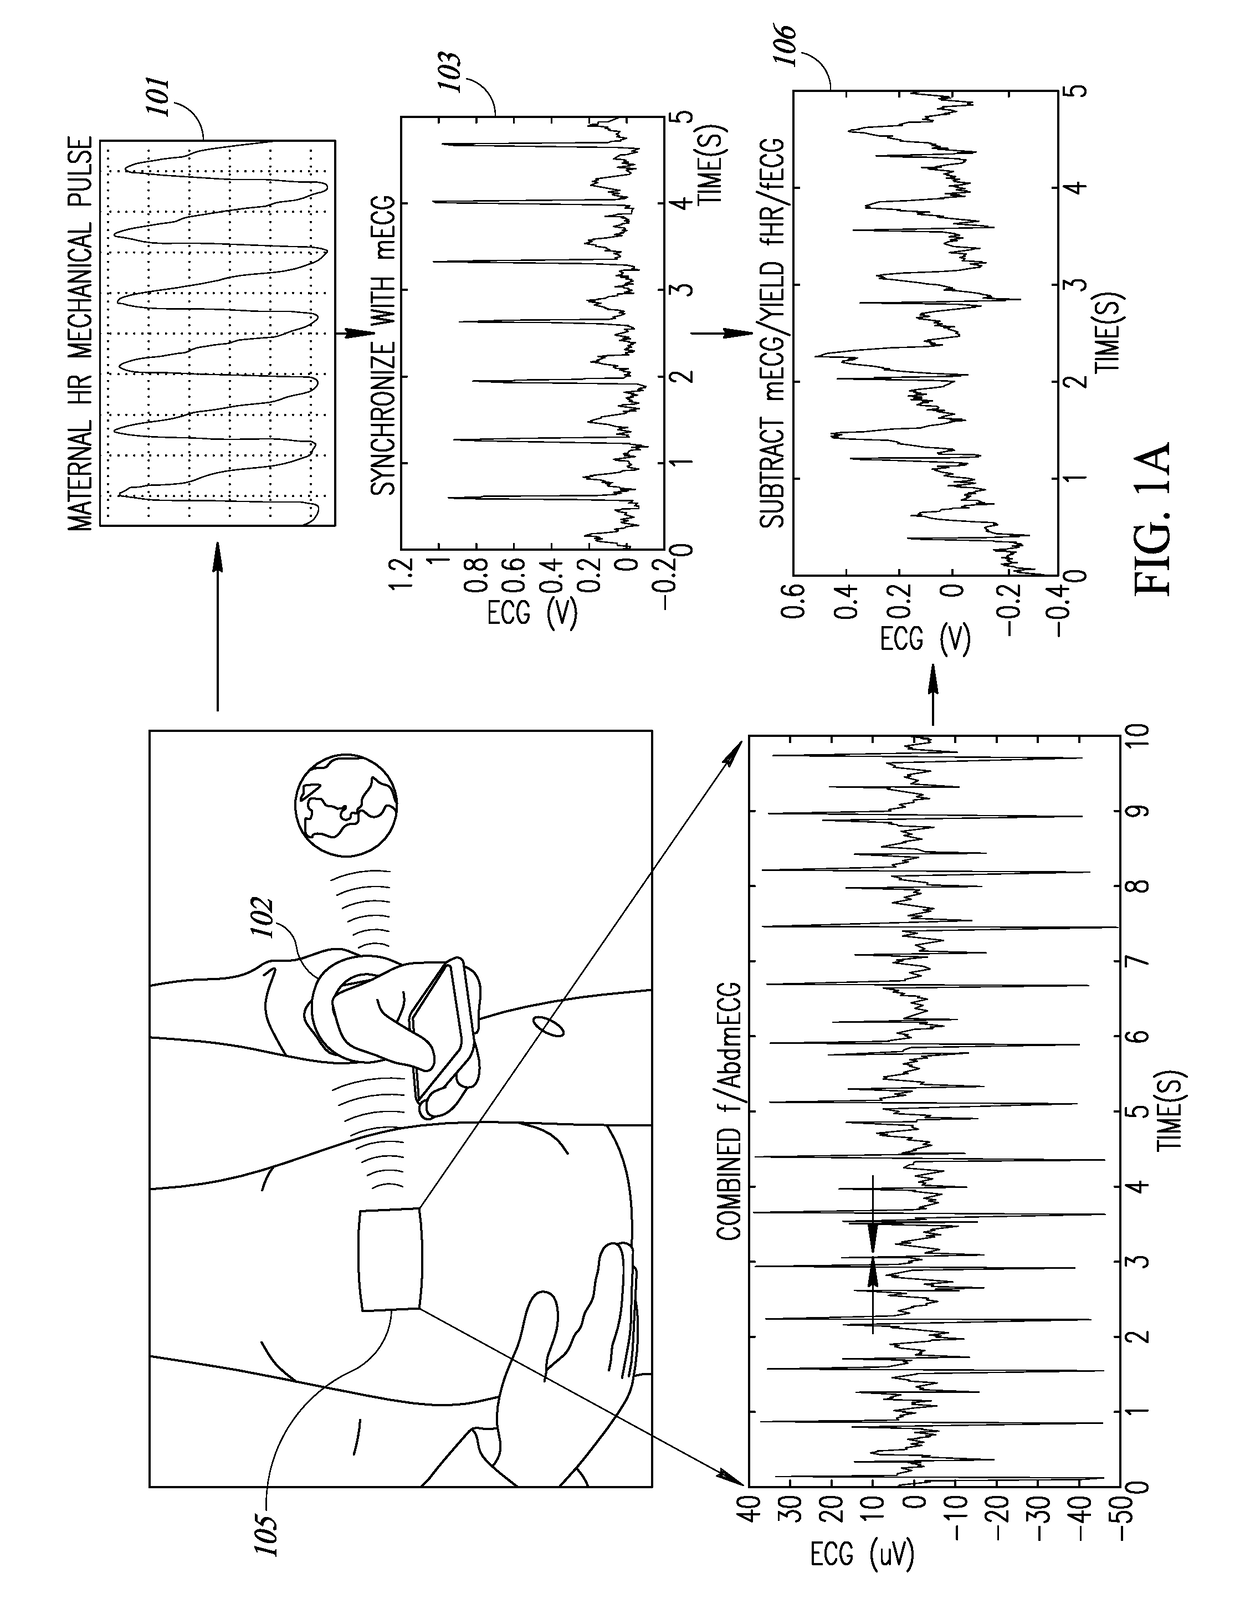 Fetal ECG and heart rate assessment and monitoring device